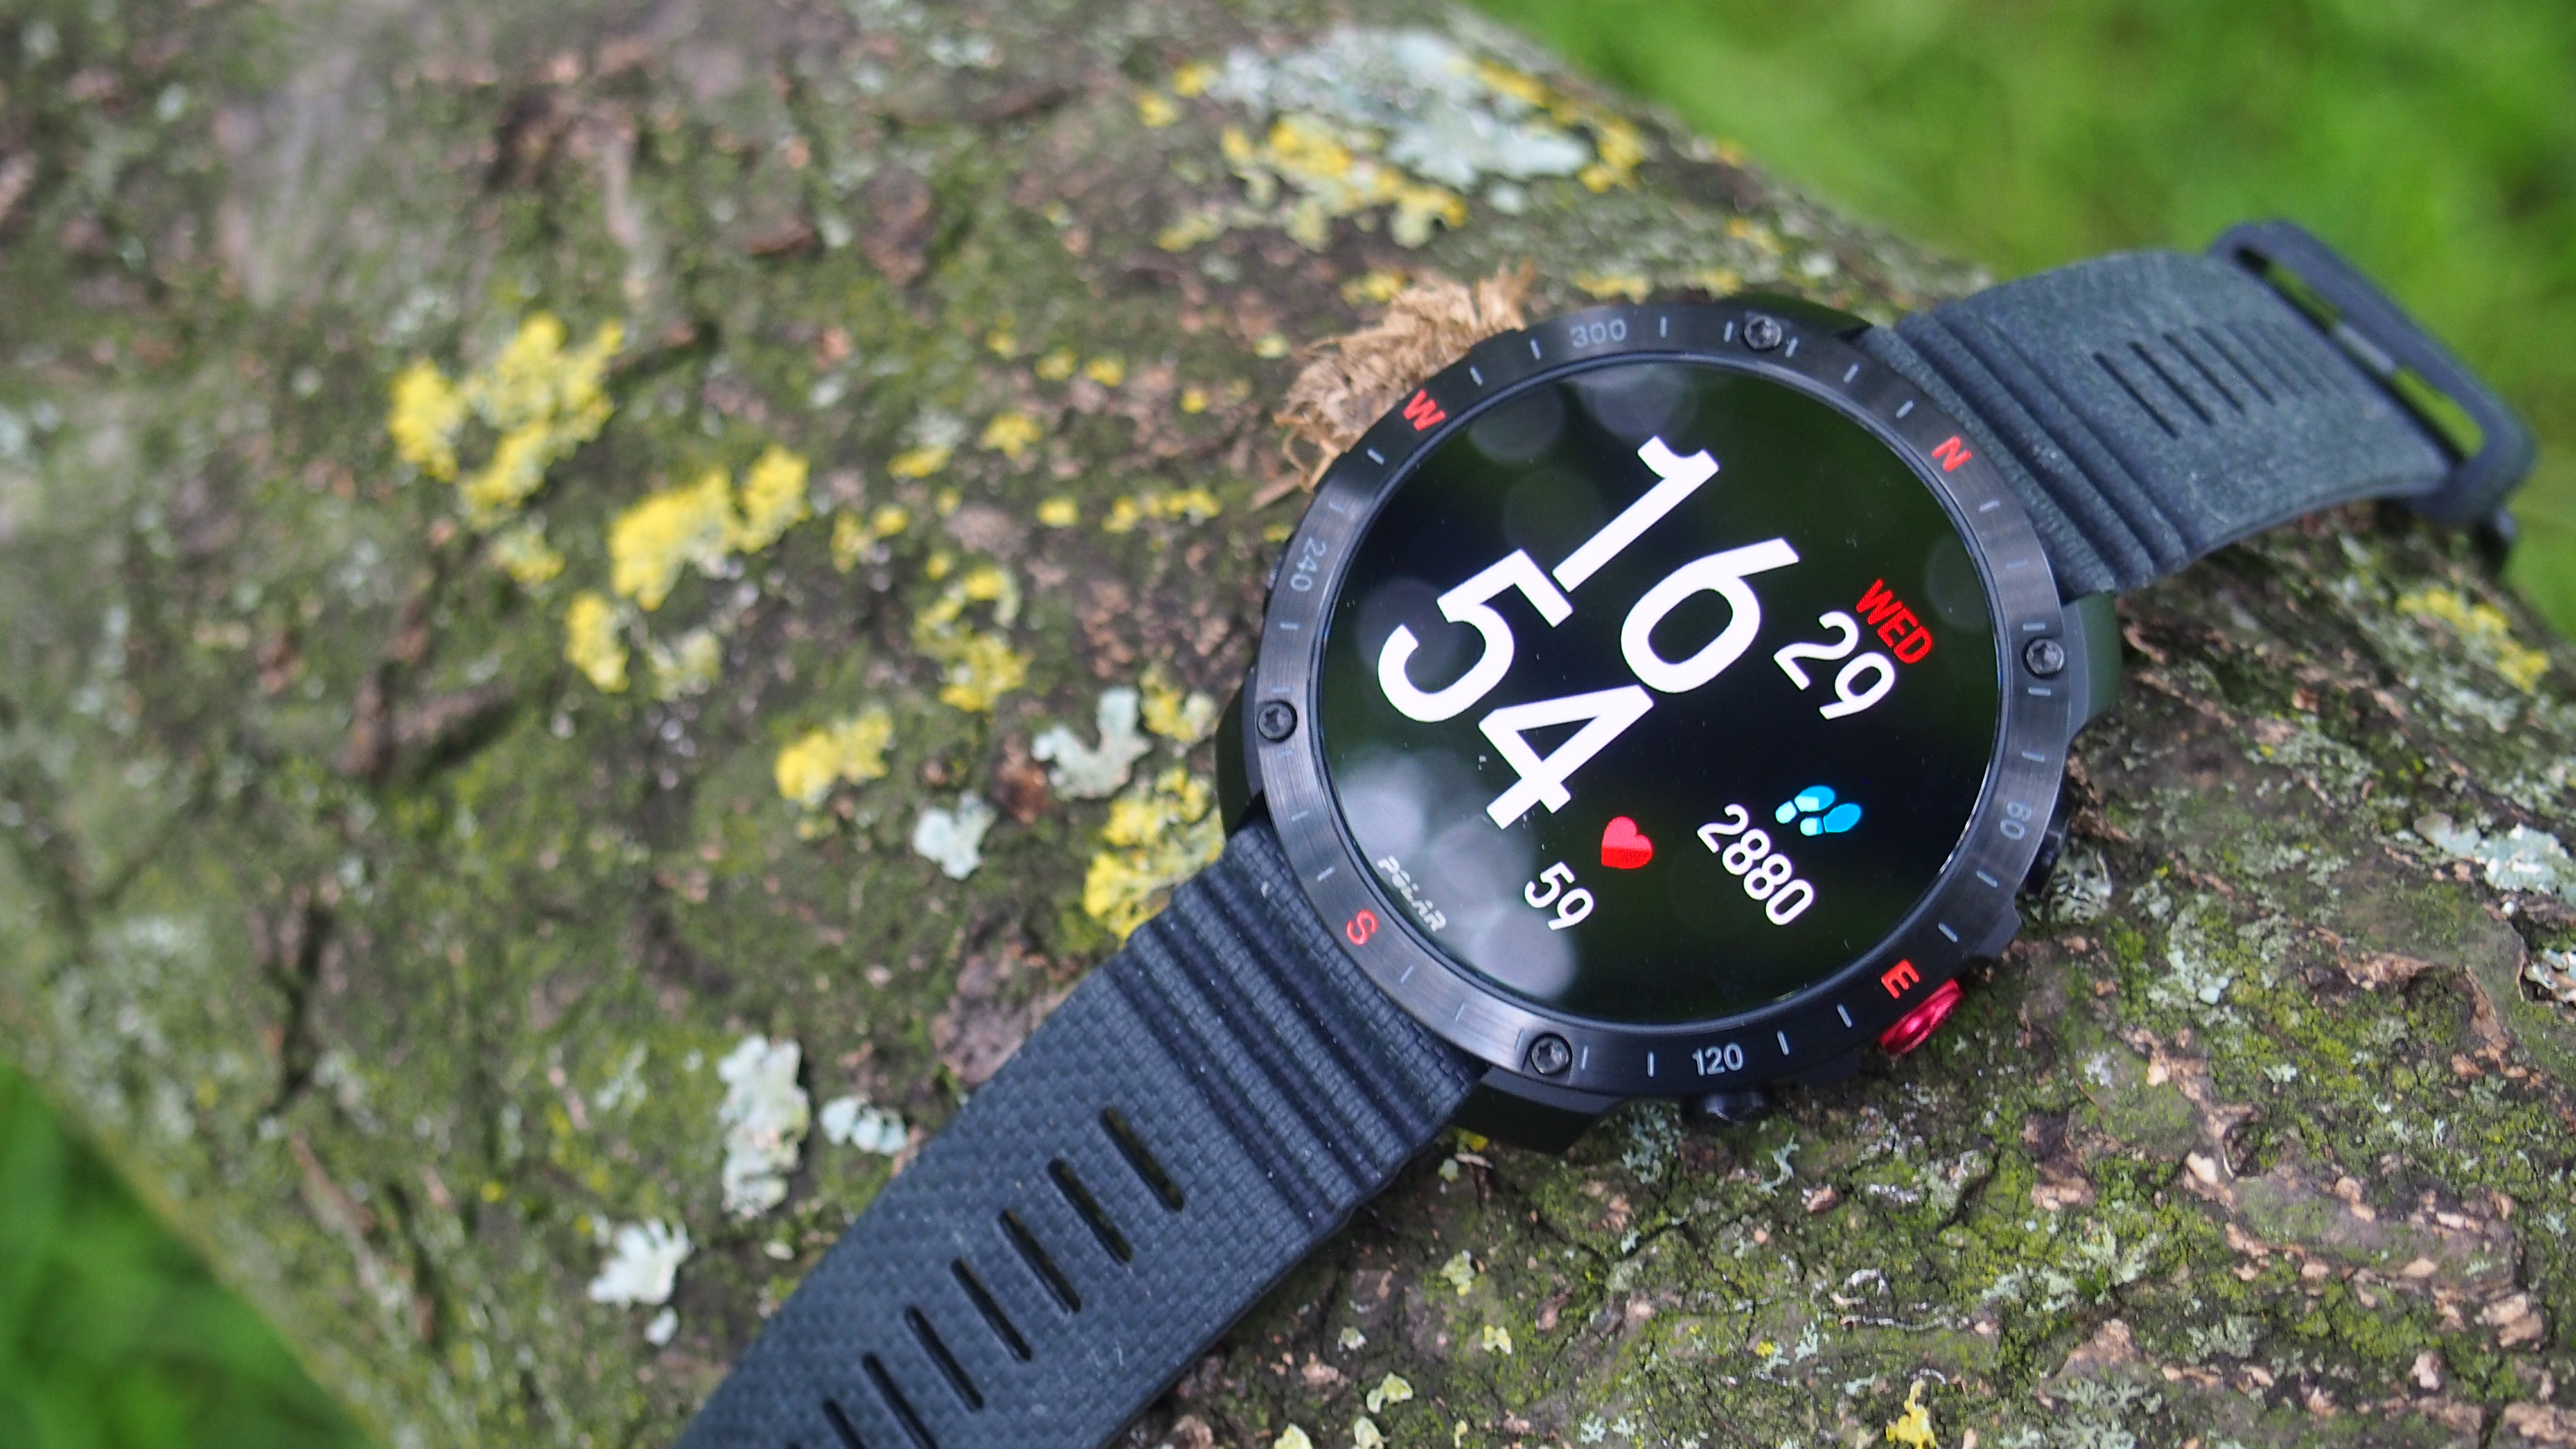 Polar Grit X2 Pro watch on a log showing clock face and step count